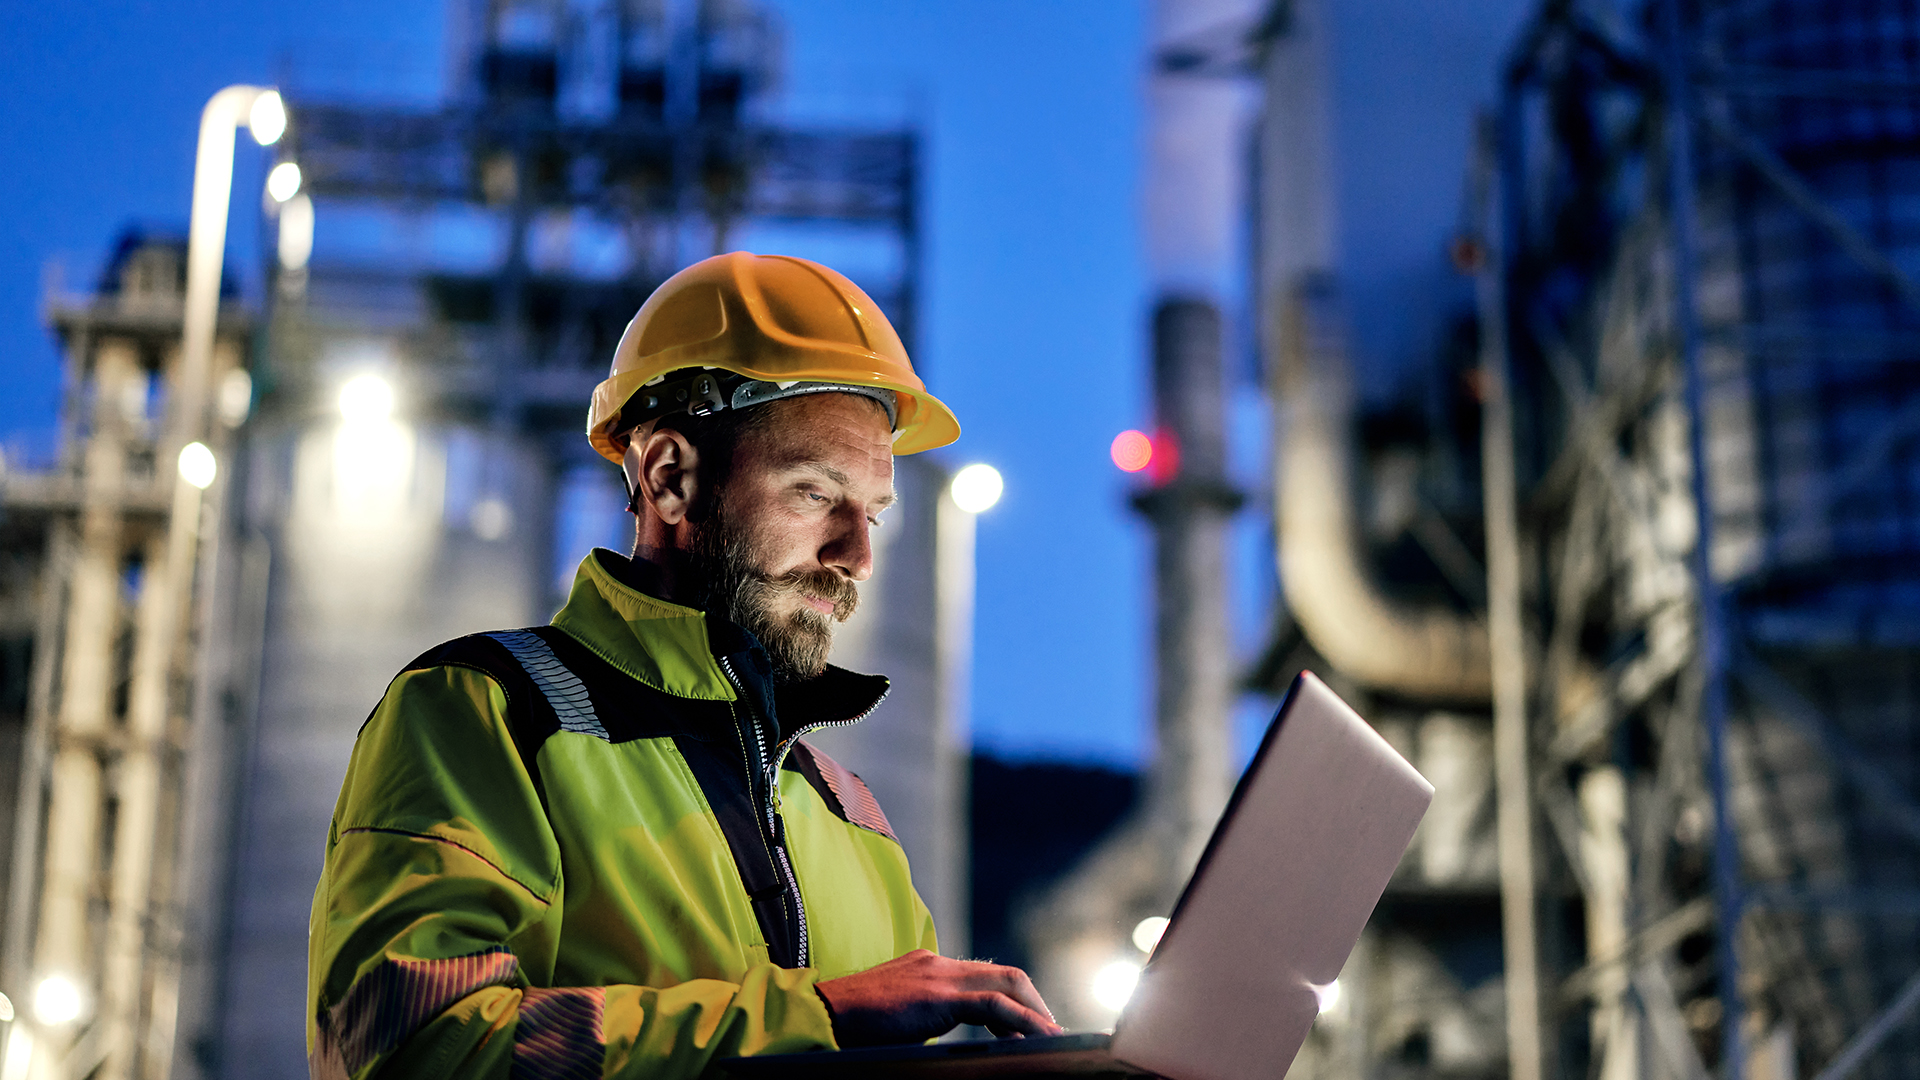 Safehub’s Sensor Solution Mitigates Downtime and Increases Safety for the Oil & Gas Industry